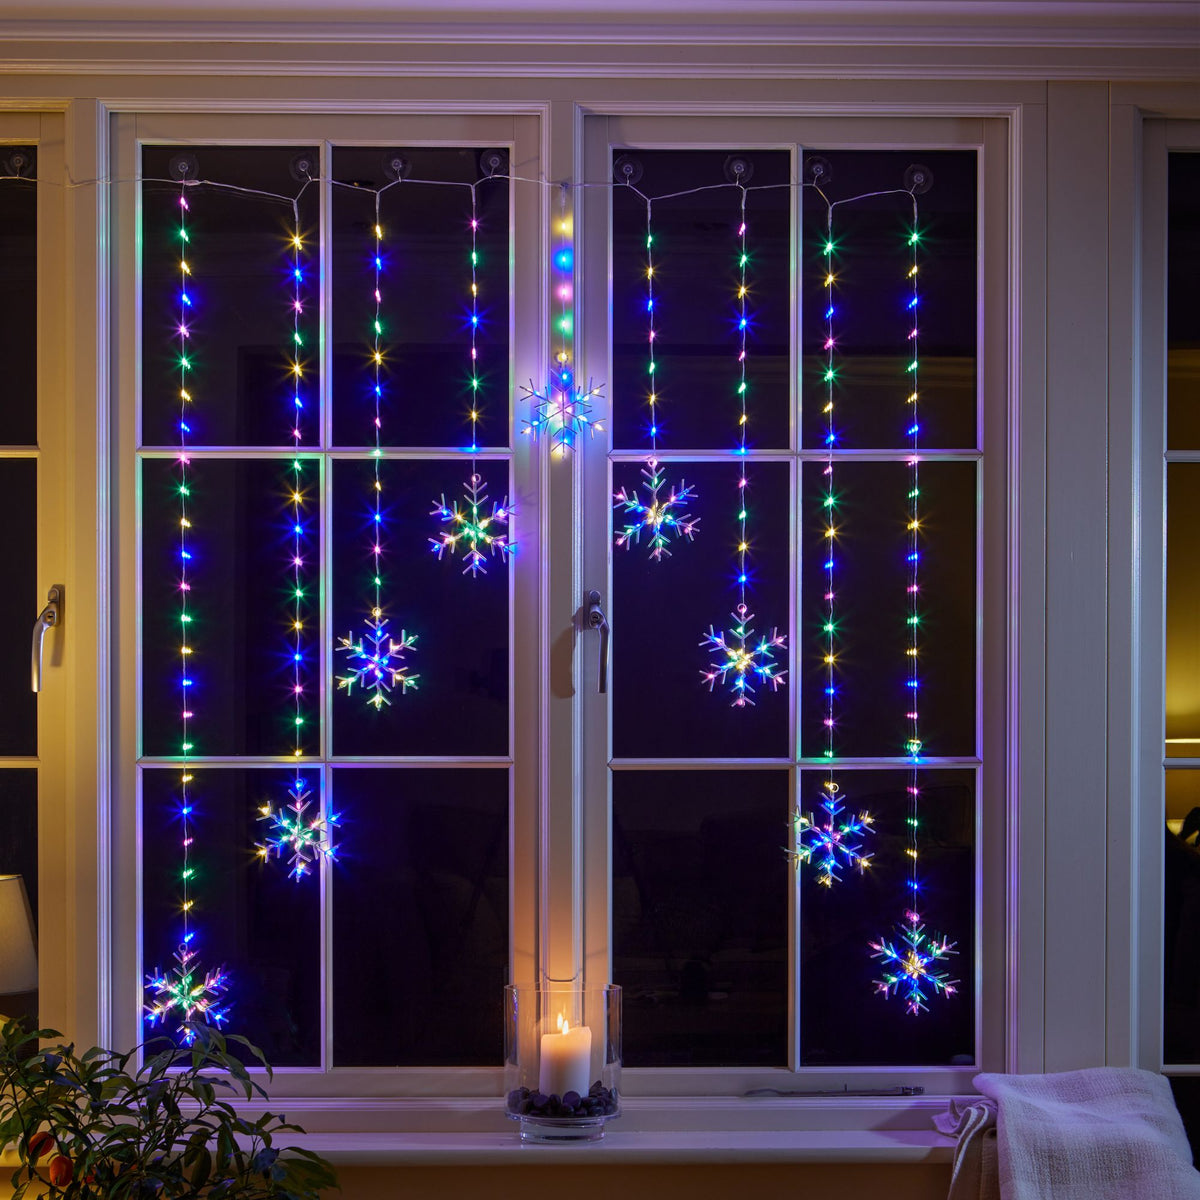 1.2m x 1.2m Multi Coloured Snowflake Curtain Light with 339 LED's